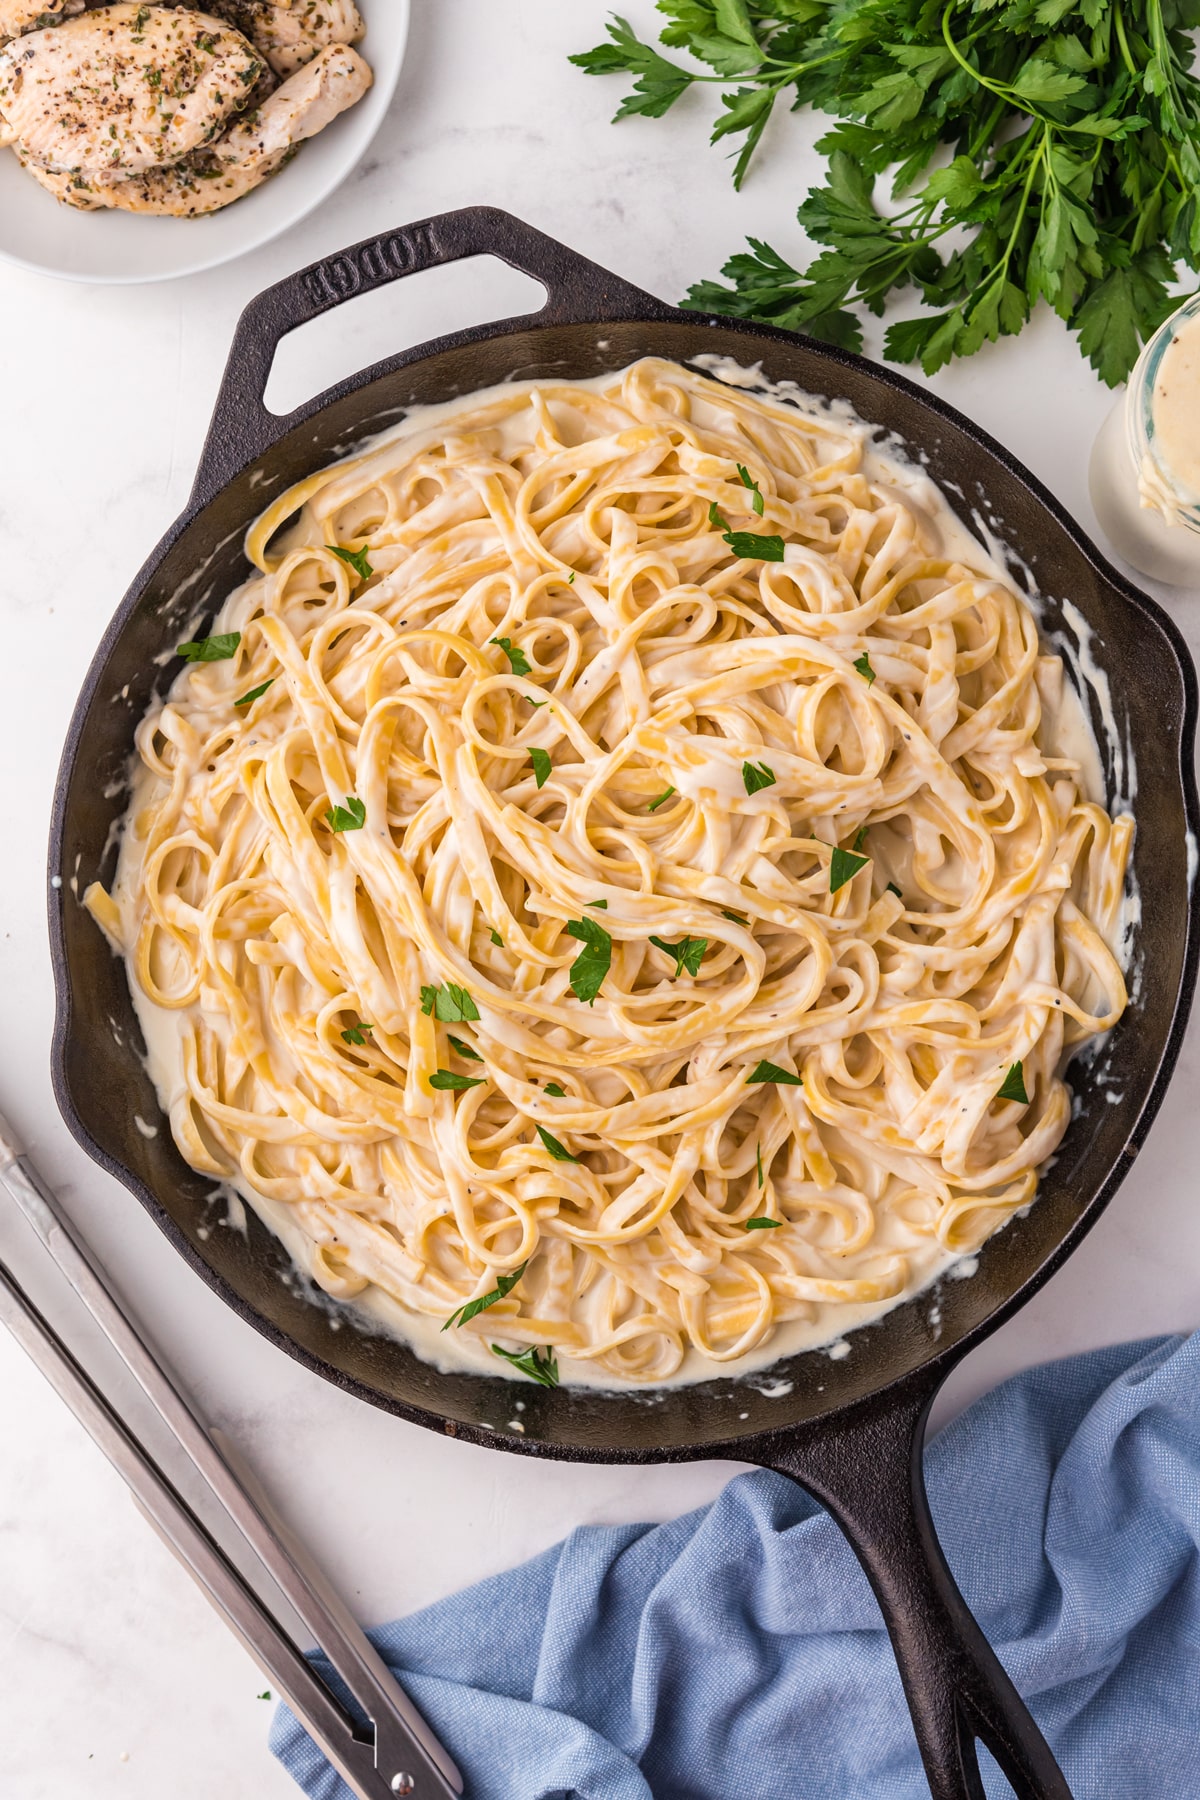 Mixing the pasta to the cheese is one of the process for Copycat Olive Garden Alfredo Sauce recipe